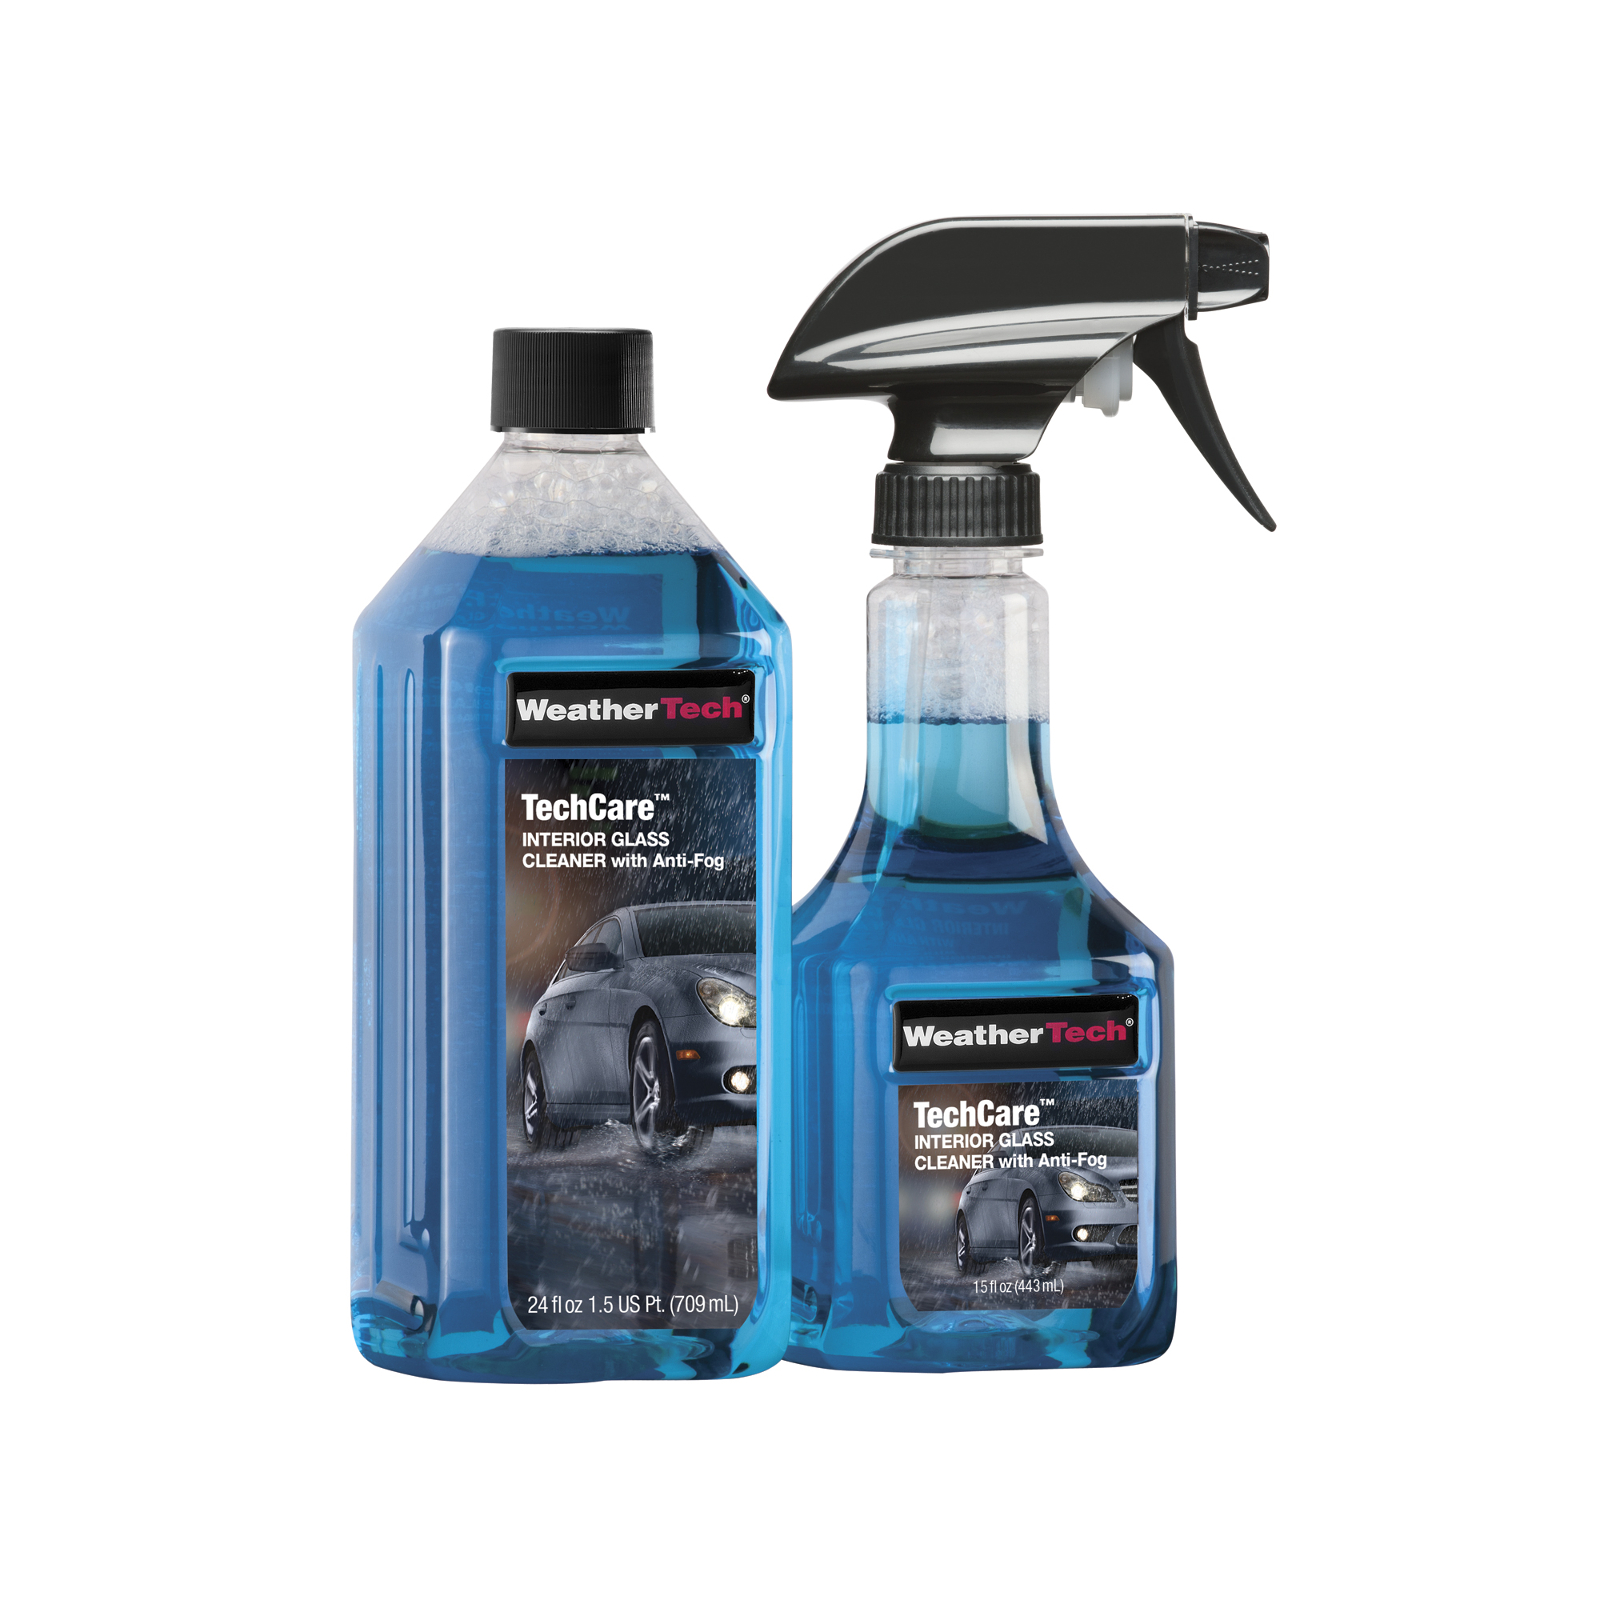 TechCare Interior Glass Cleaner with Anti-Fog Kit